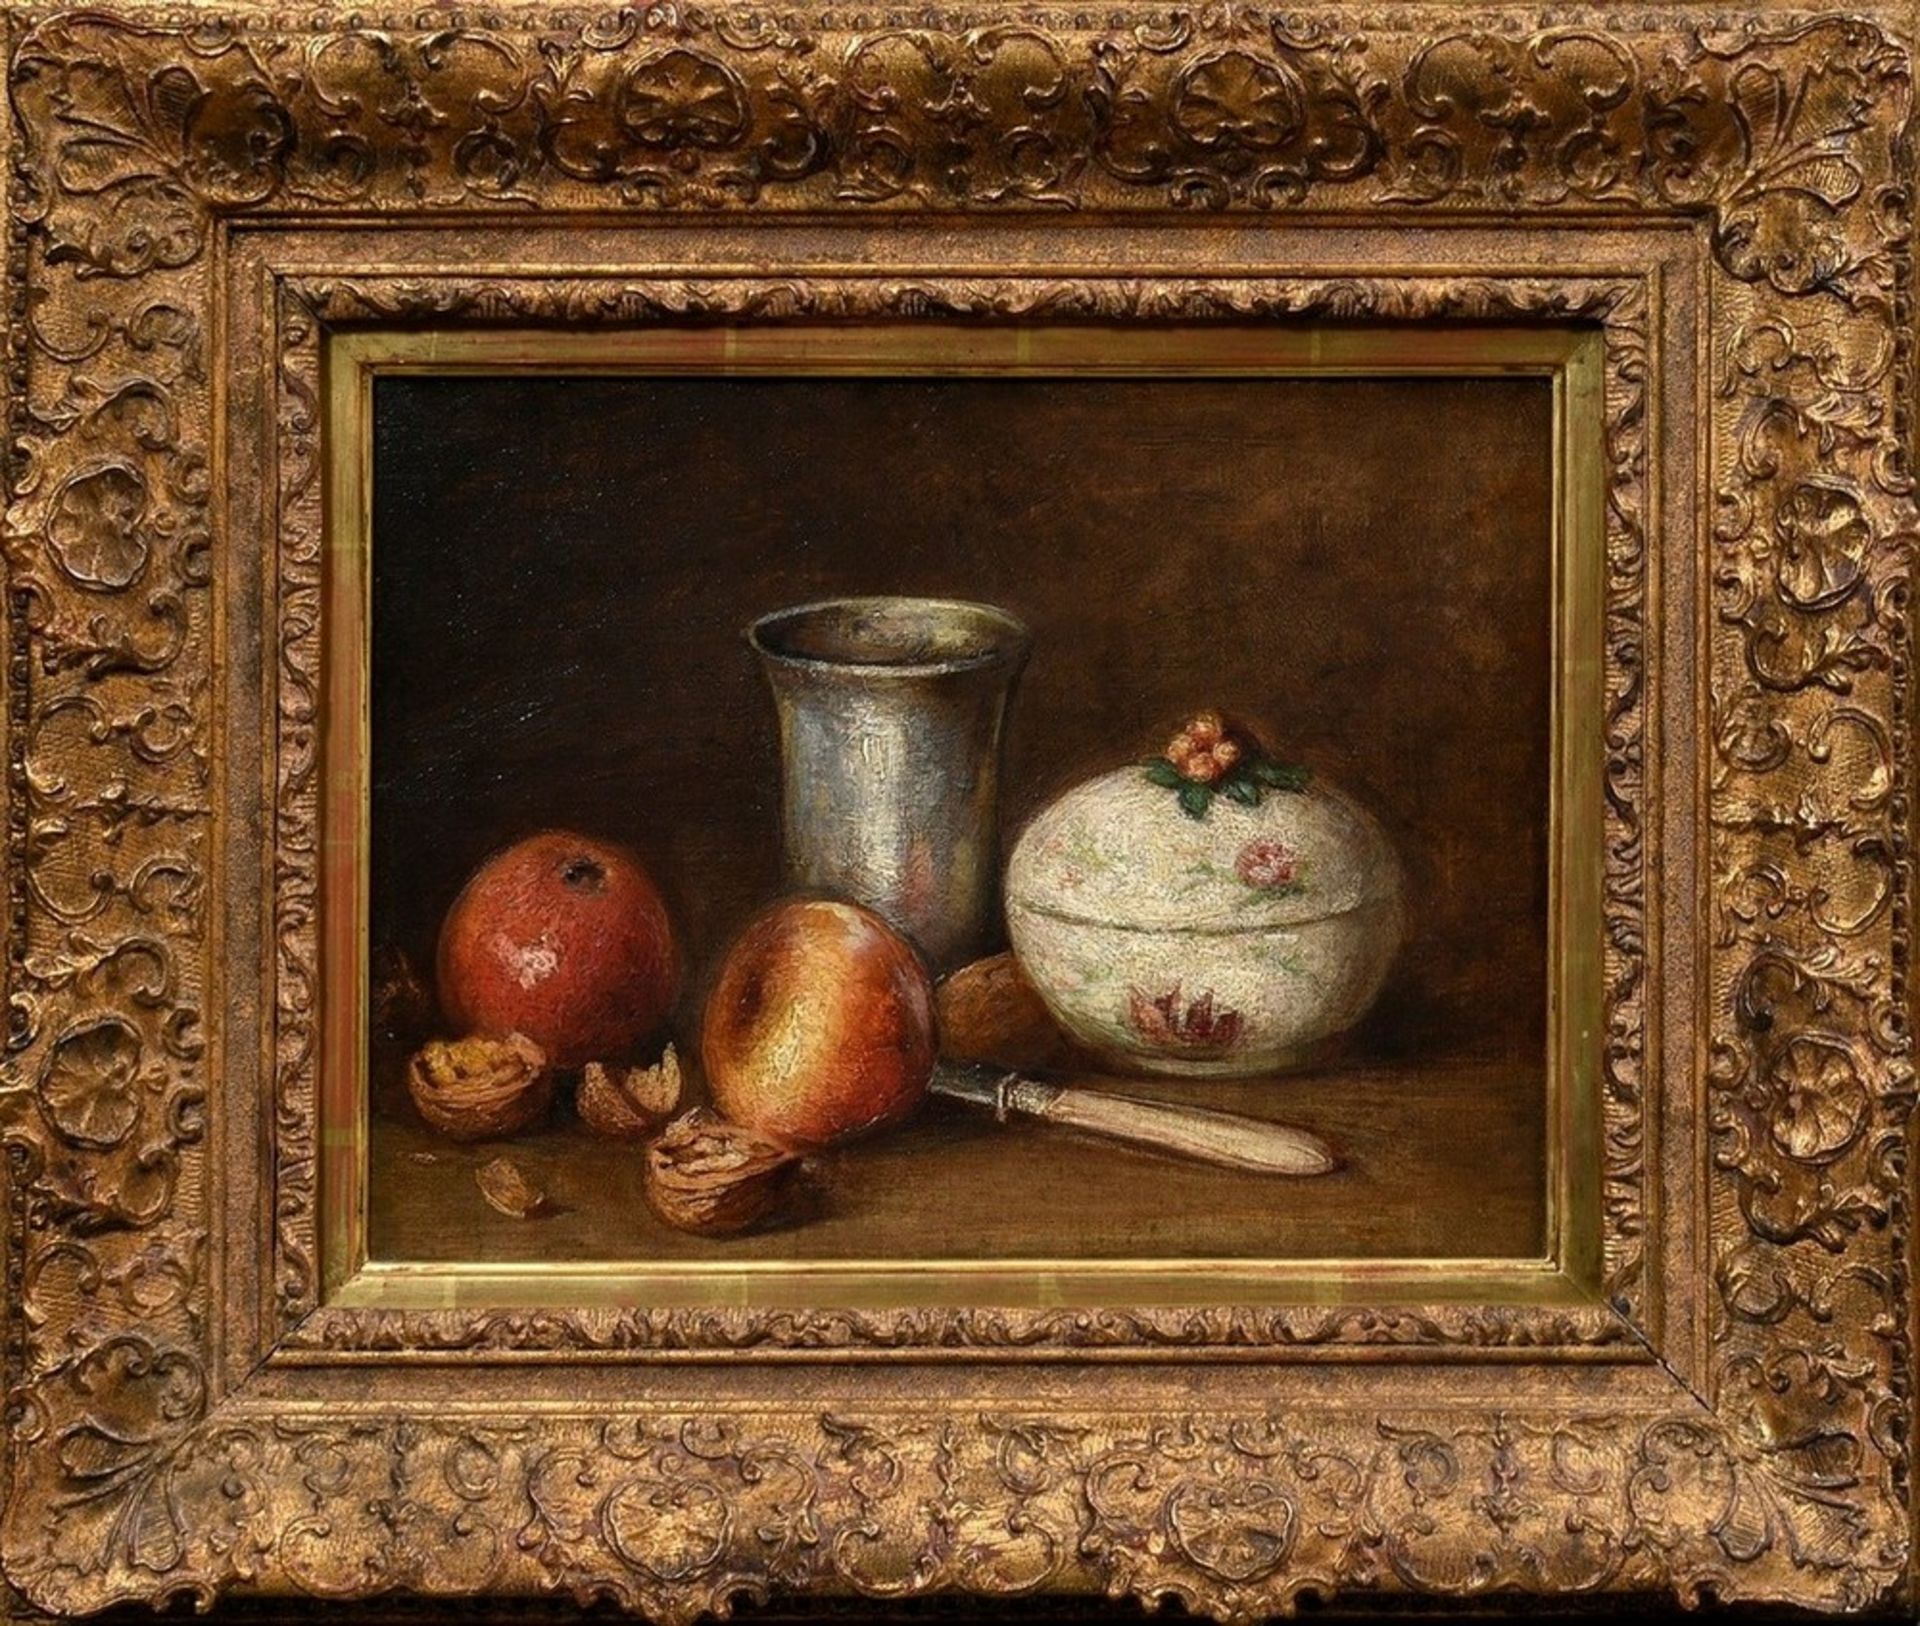 Dujardin, Edward (1817-1889) attributed "Fruit Still Life with Silver Cup and Porcelain Box", oil/c - Image 2 of 4